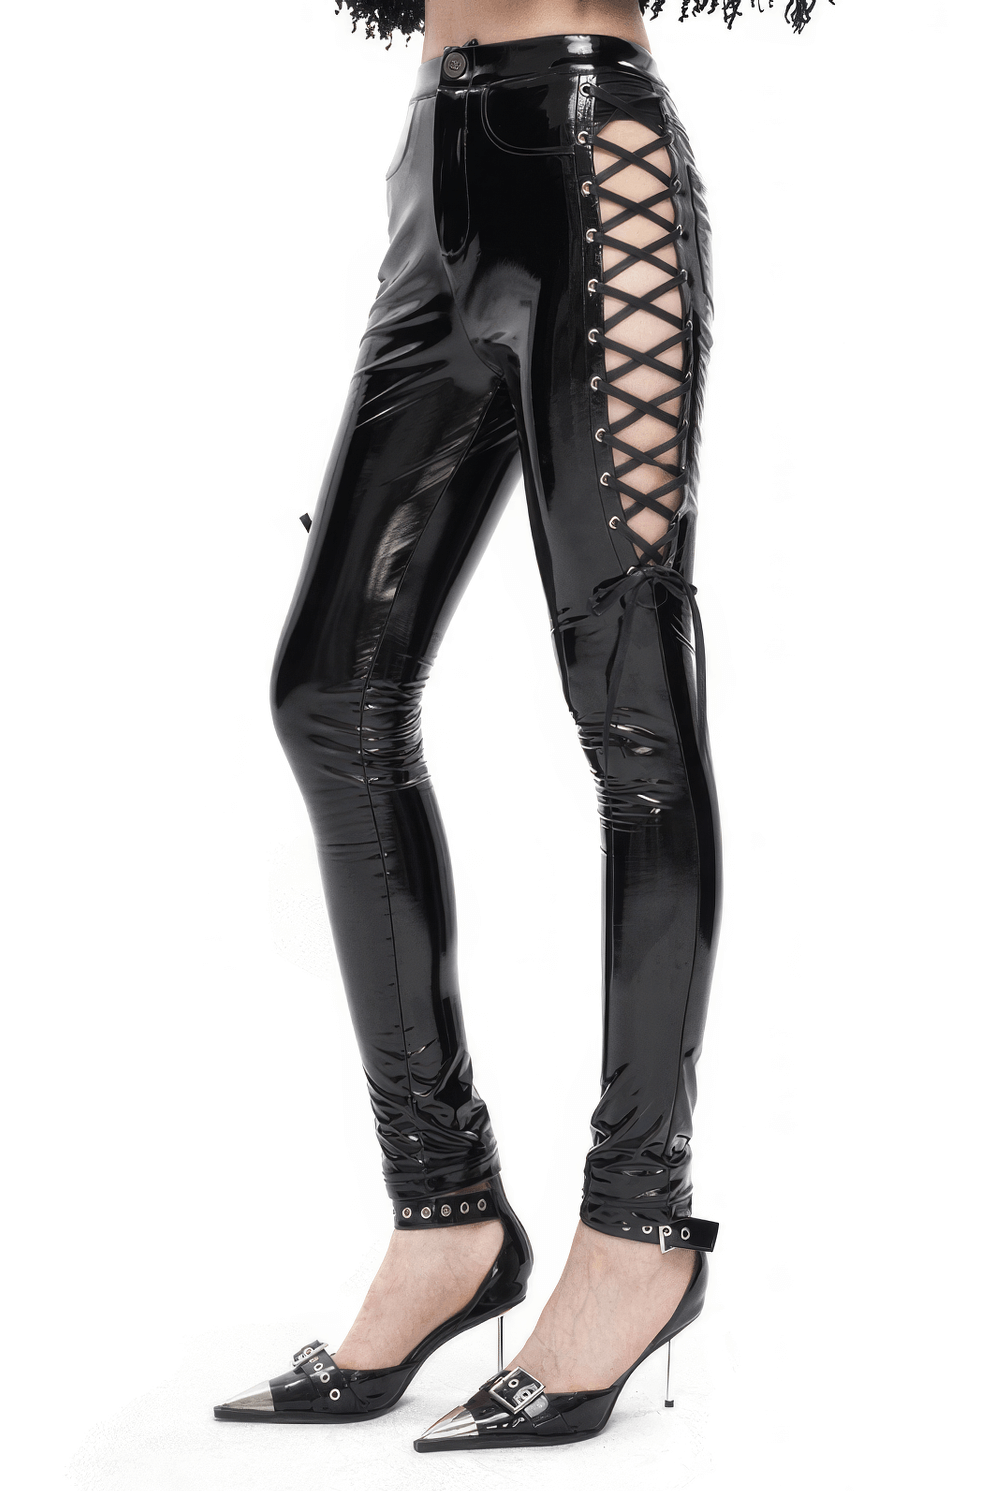 Women's Hollow Patent Leather Pants With Lace-Up on Sides